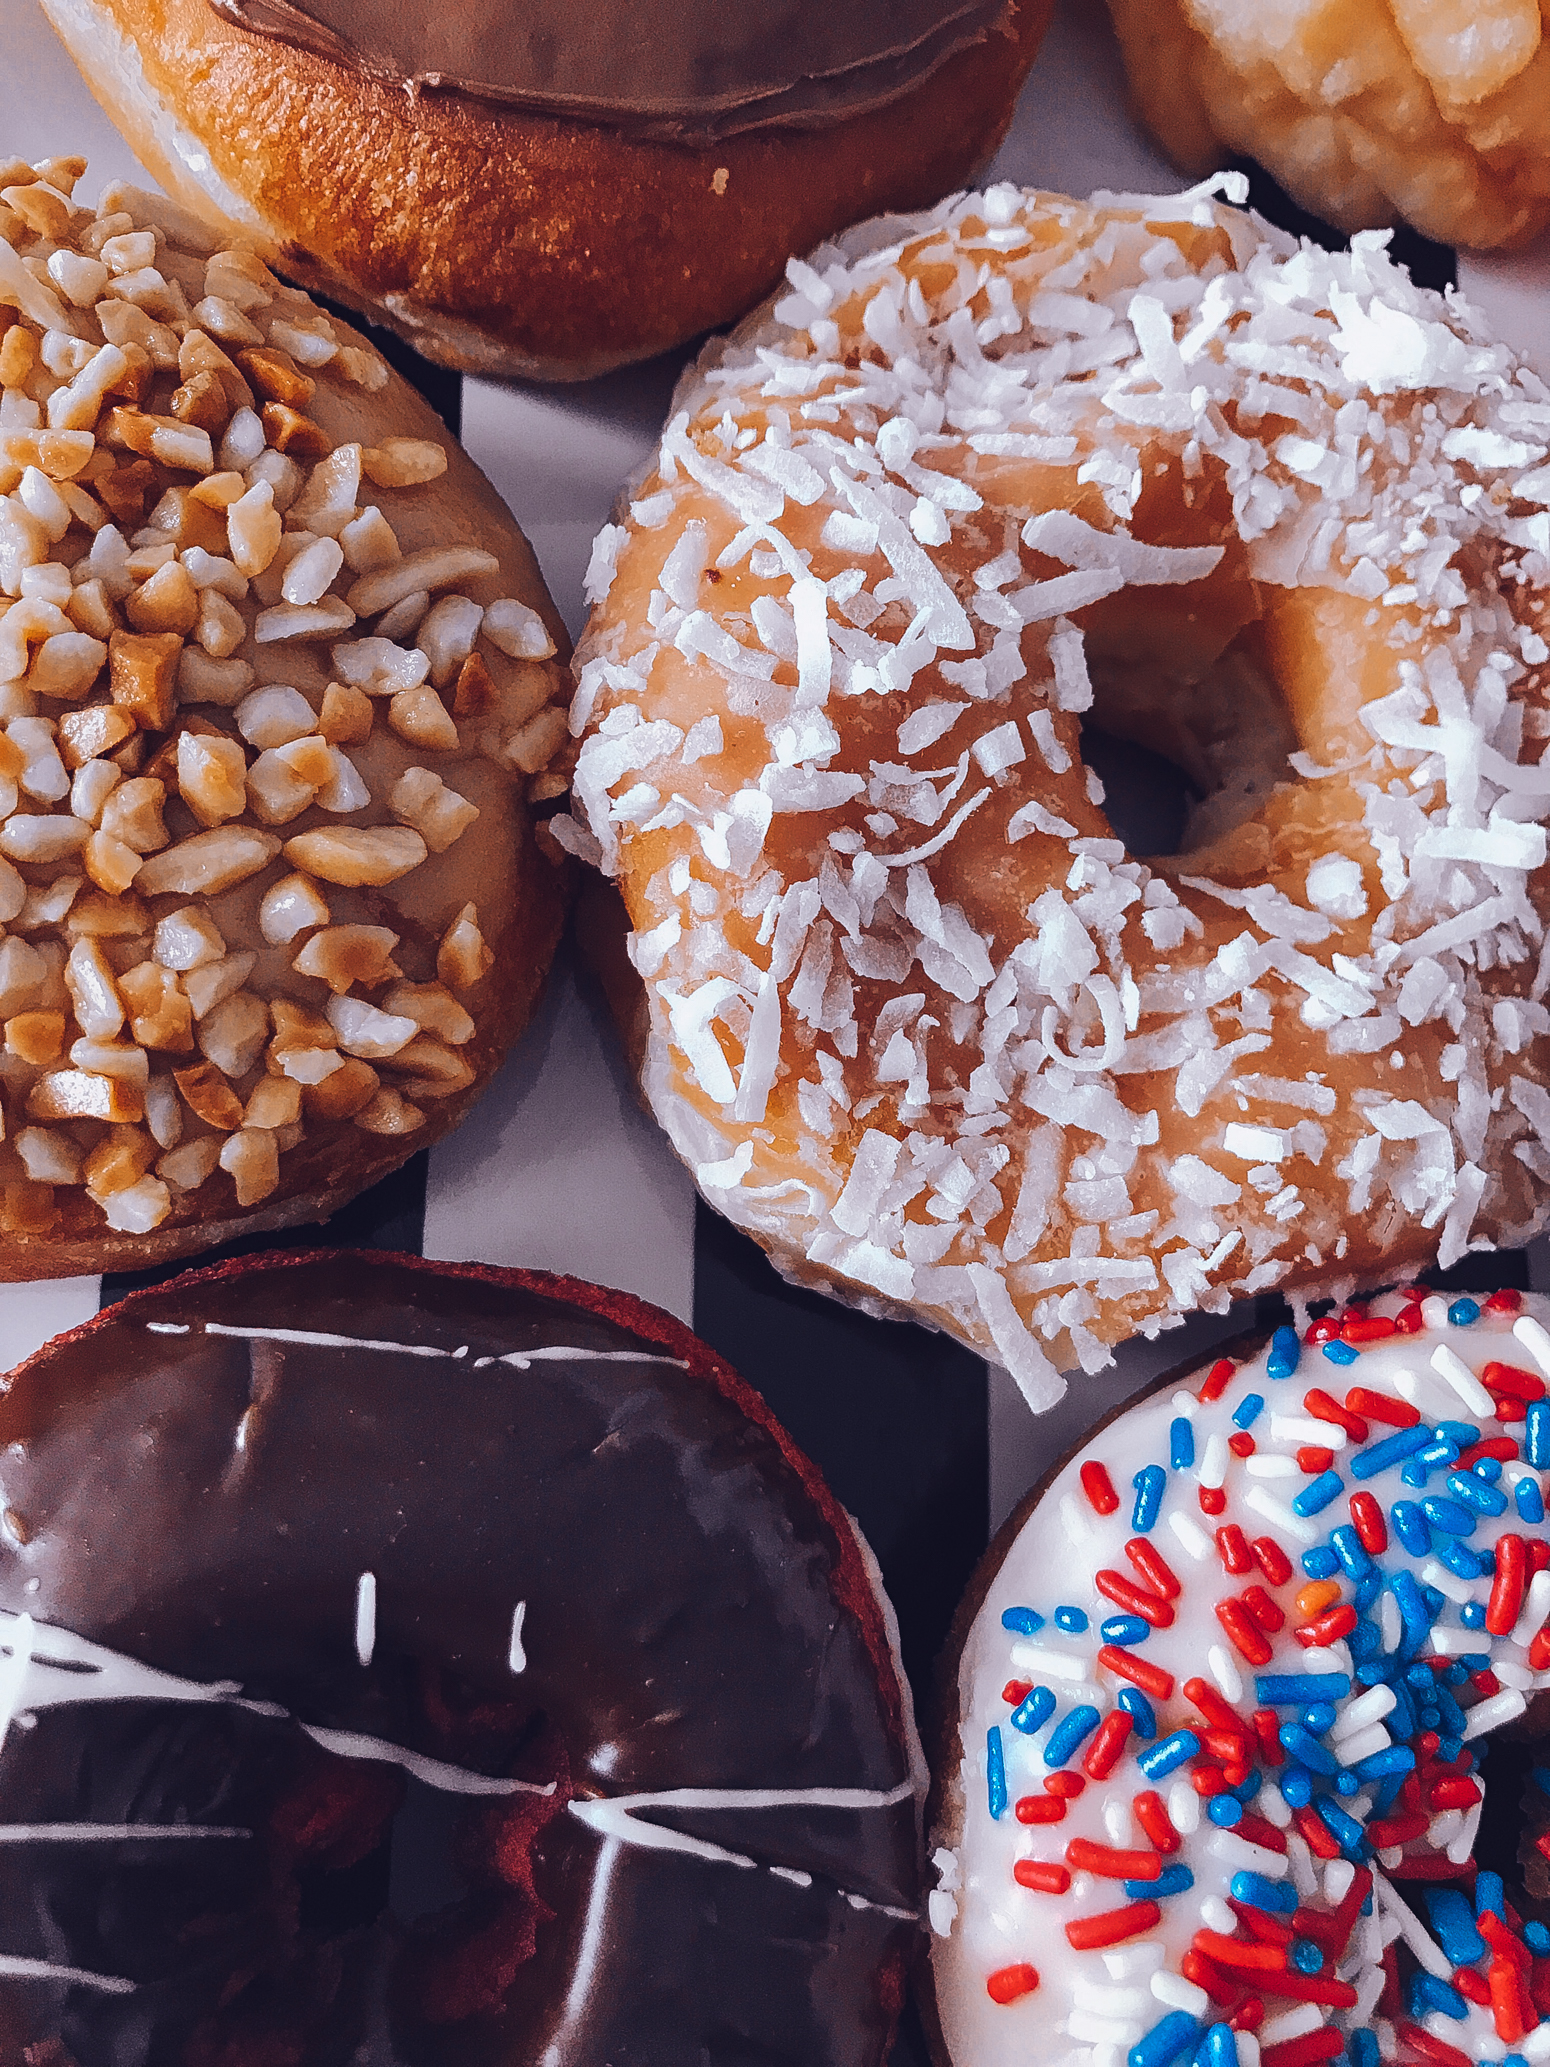 Blondie in the City | My Top 5 Favorite Donut Shops In SoCal